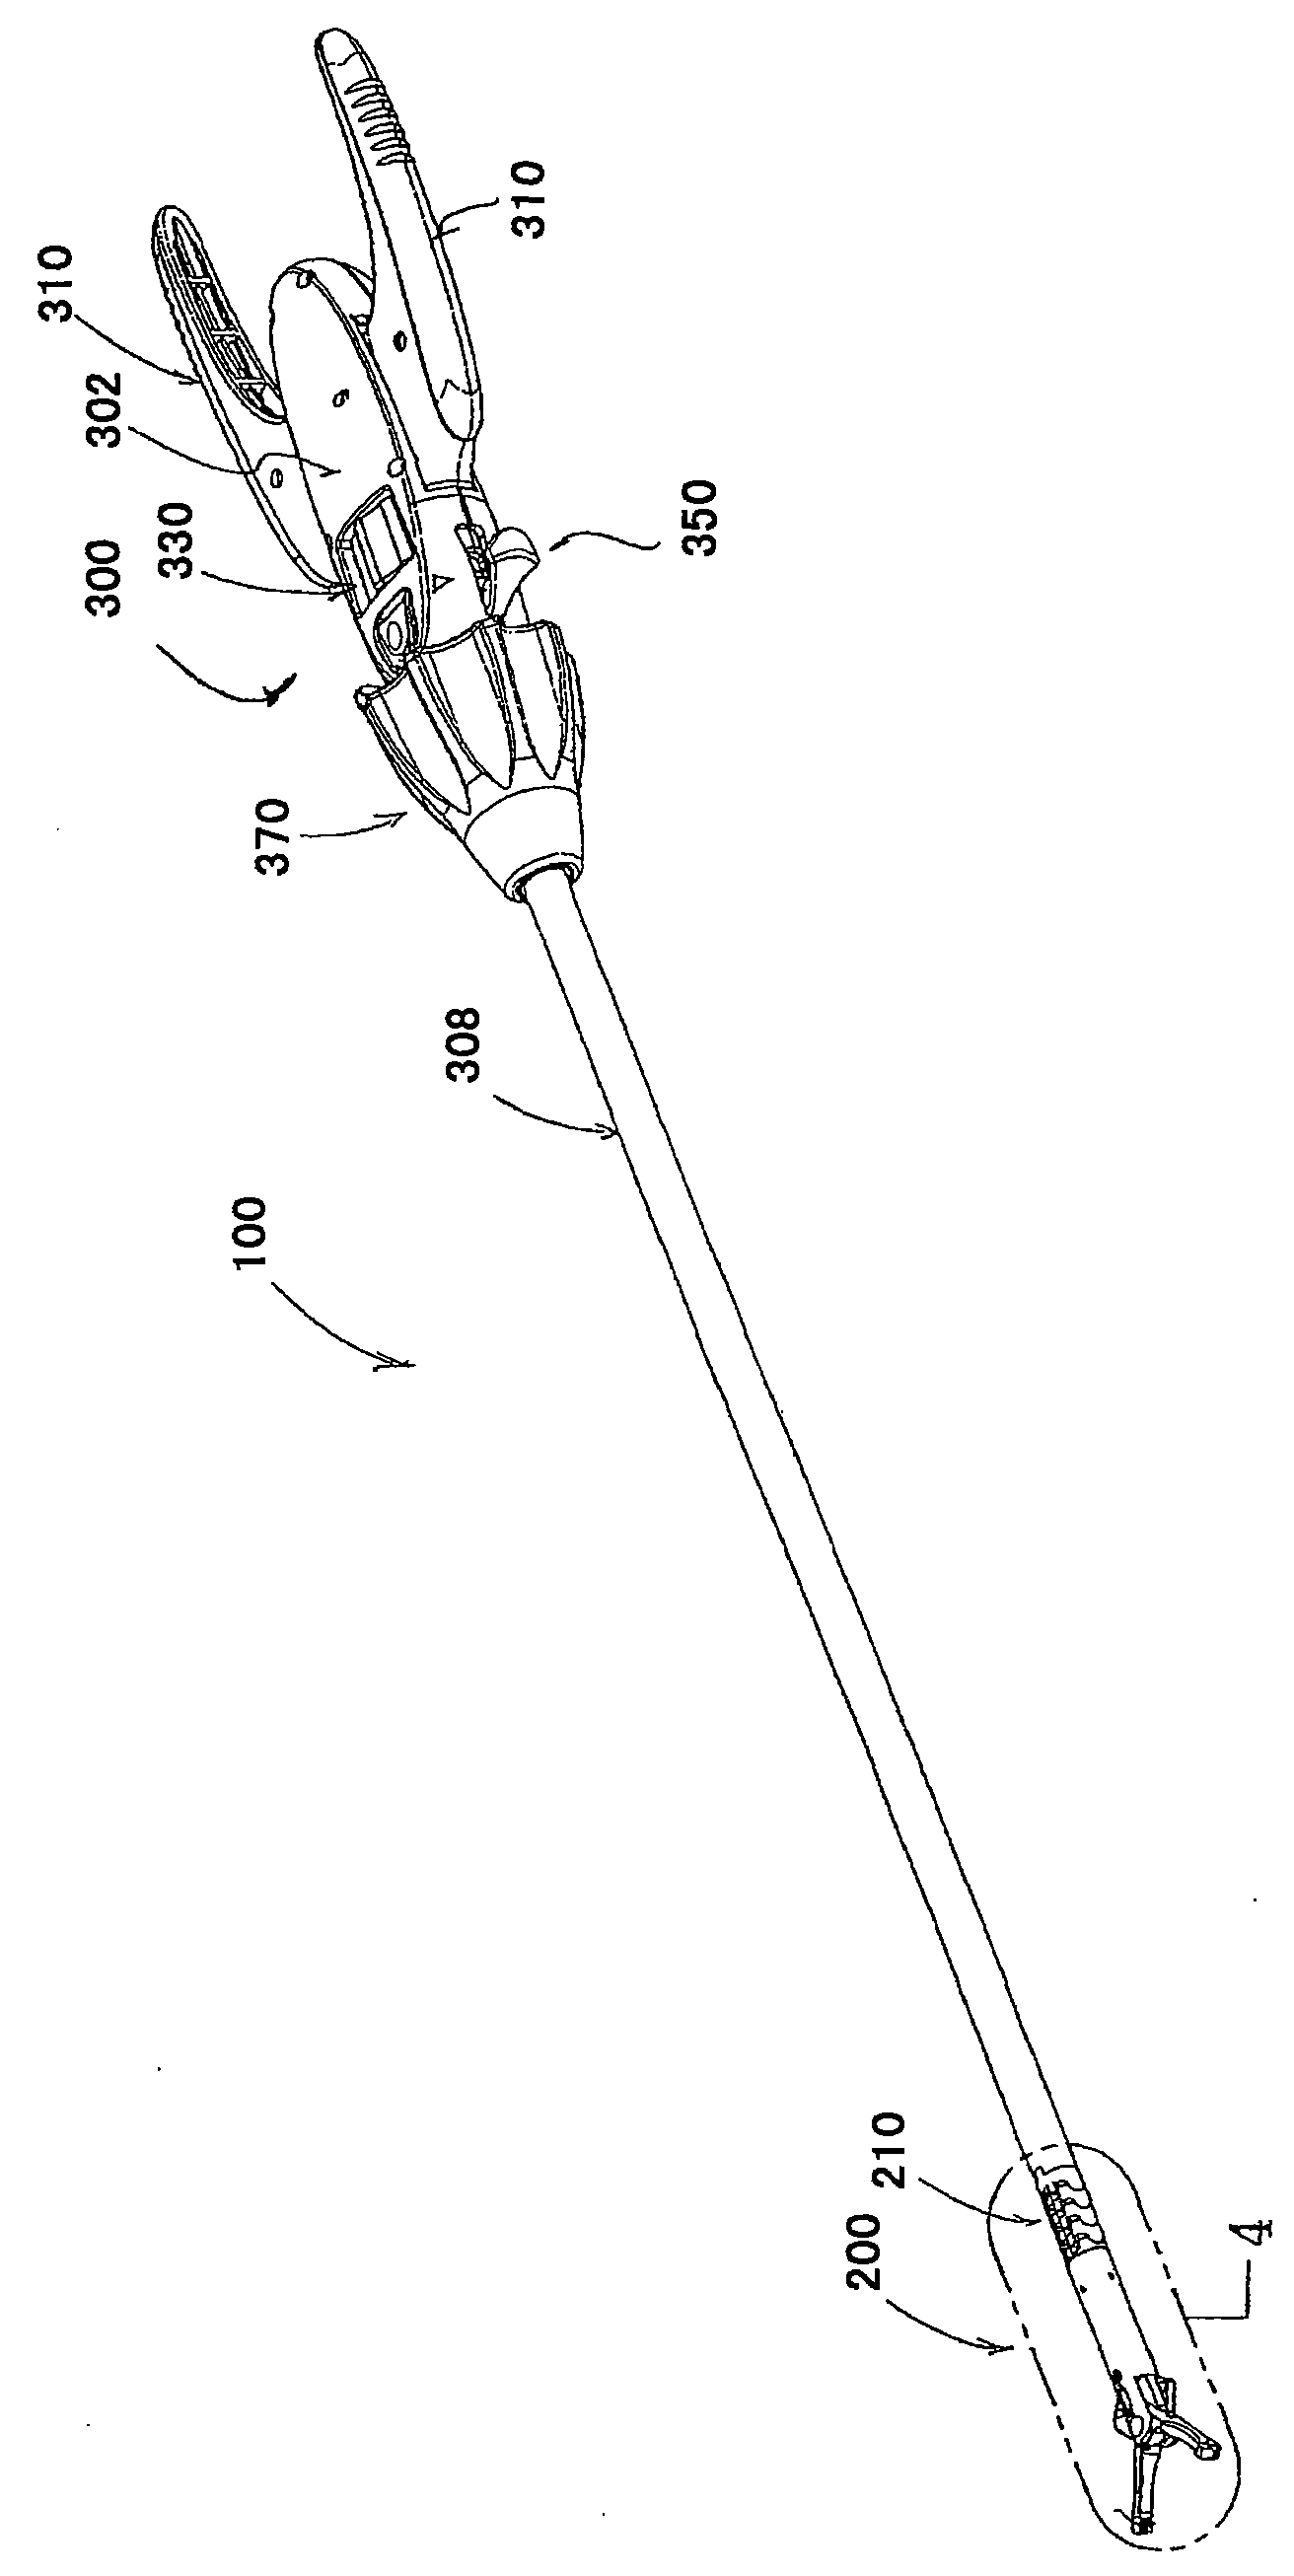 Endoscope sewing device